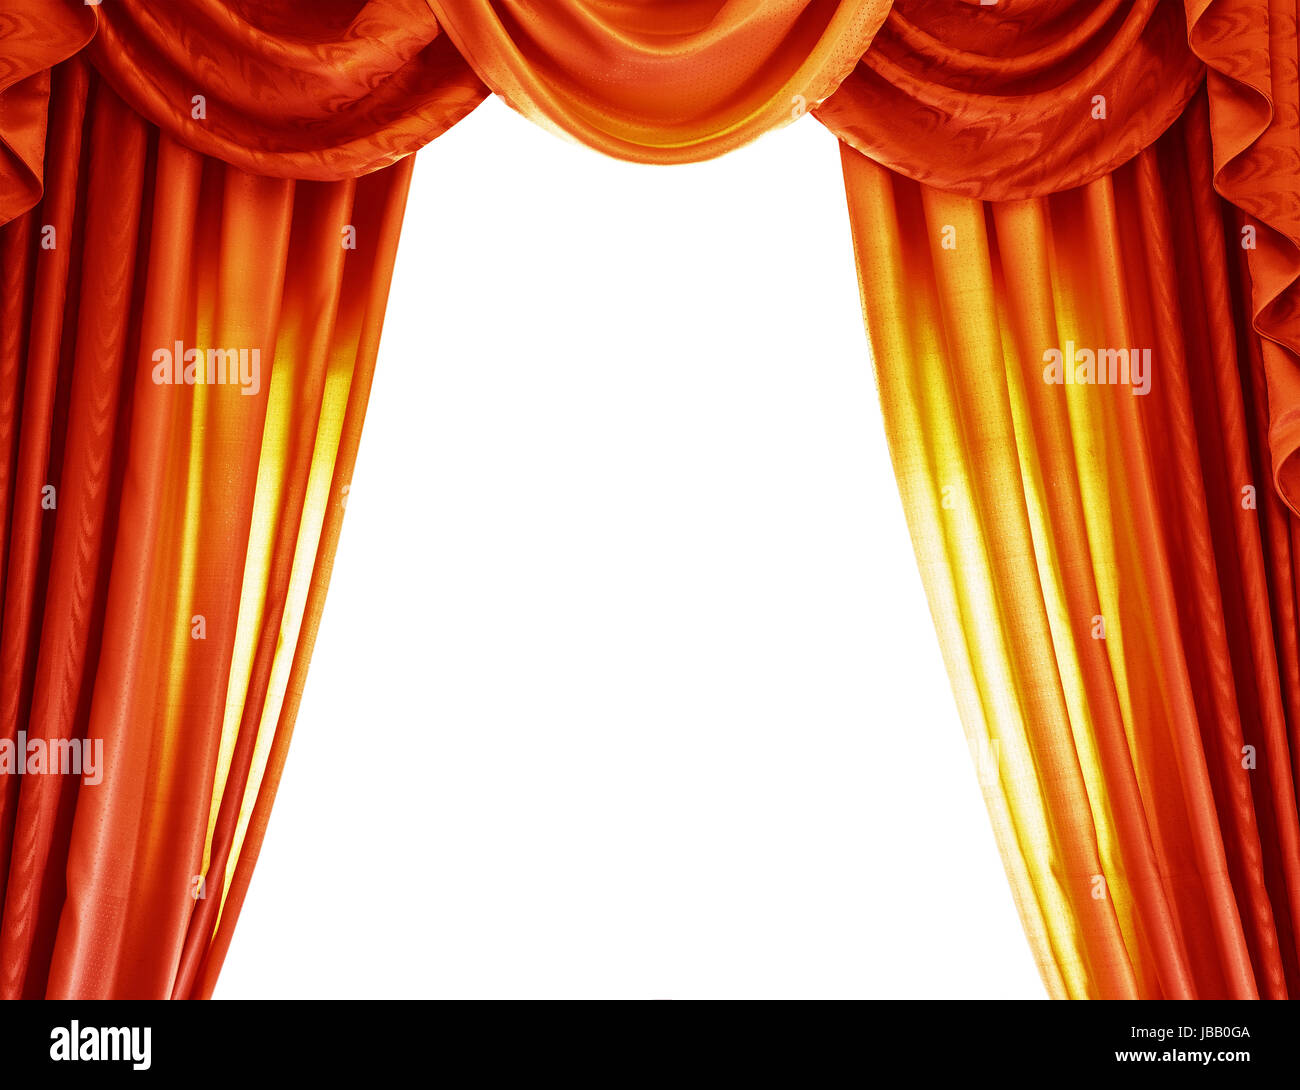 Luxury orange curtains isolated on white background, abstract border, open  curtain on the theatre, theatrical performance concept Stock Photo - Alamy